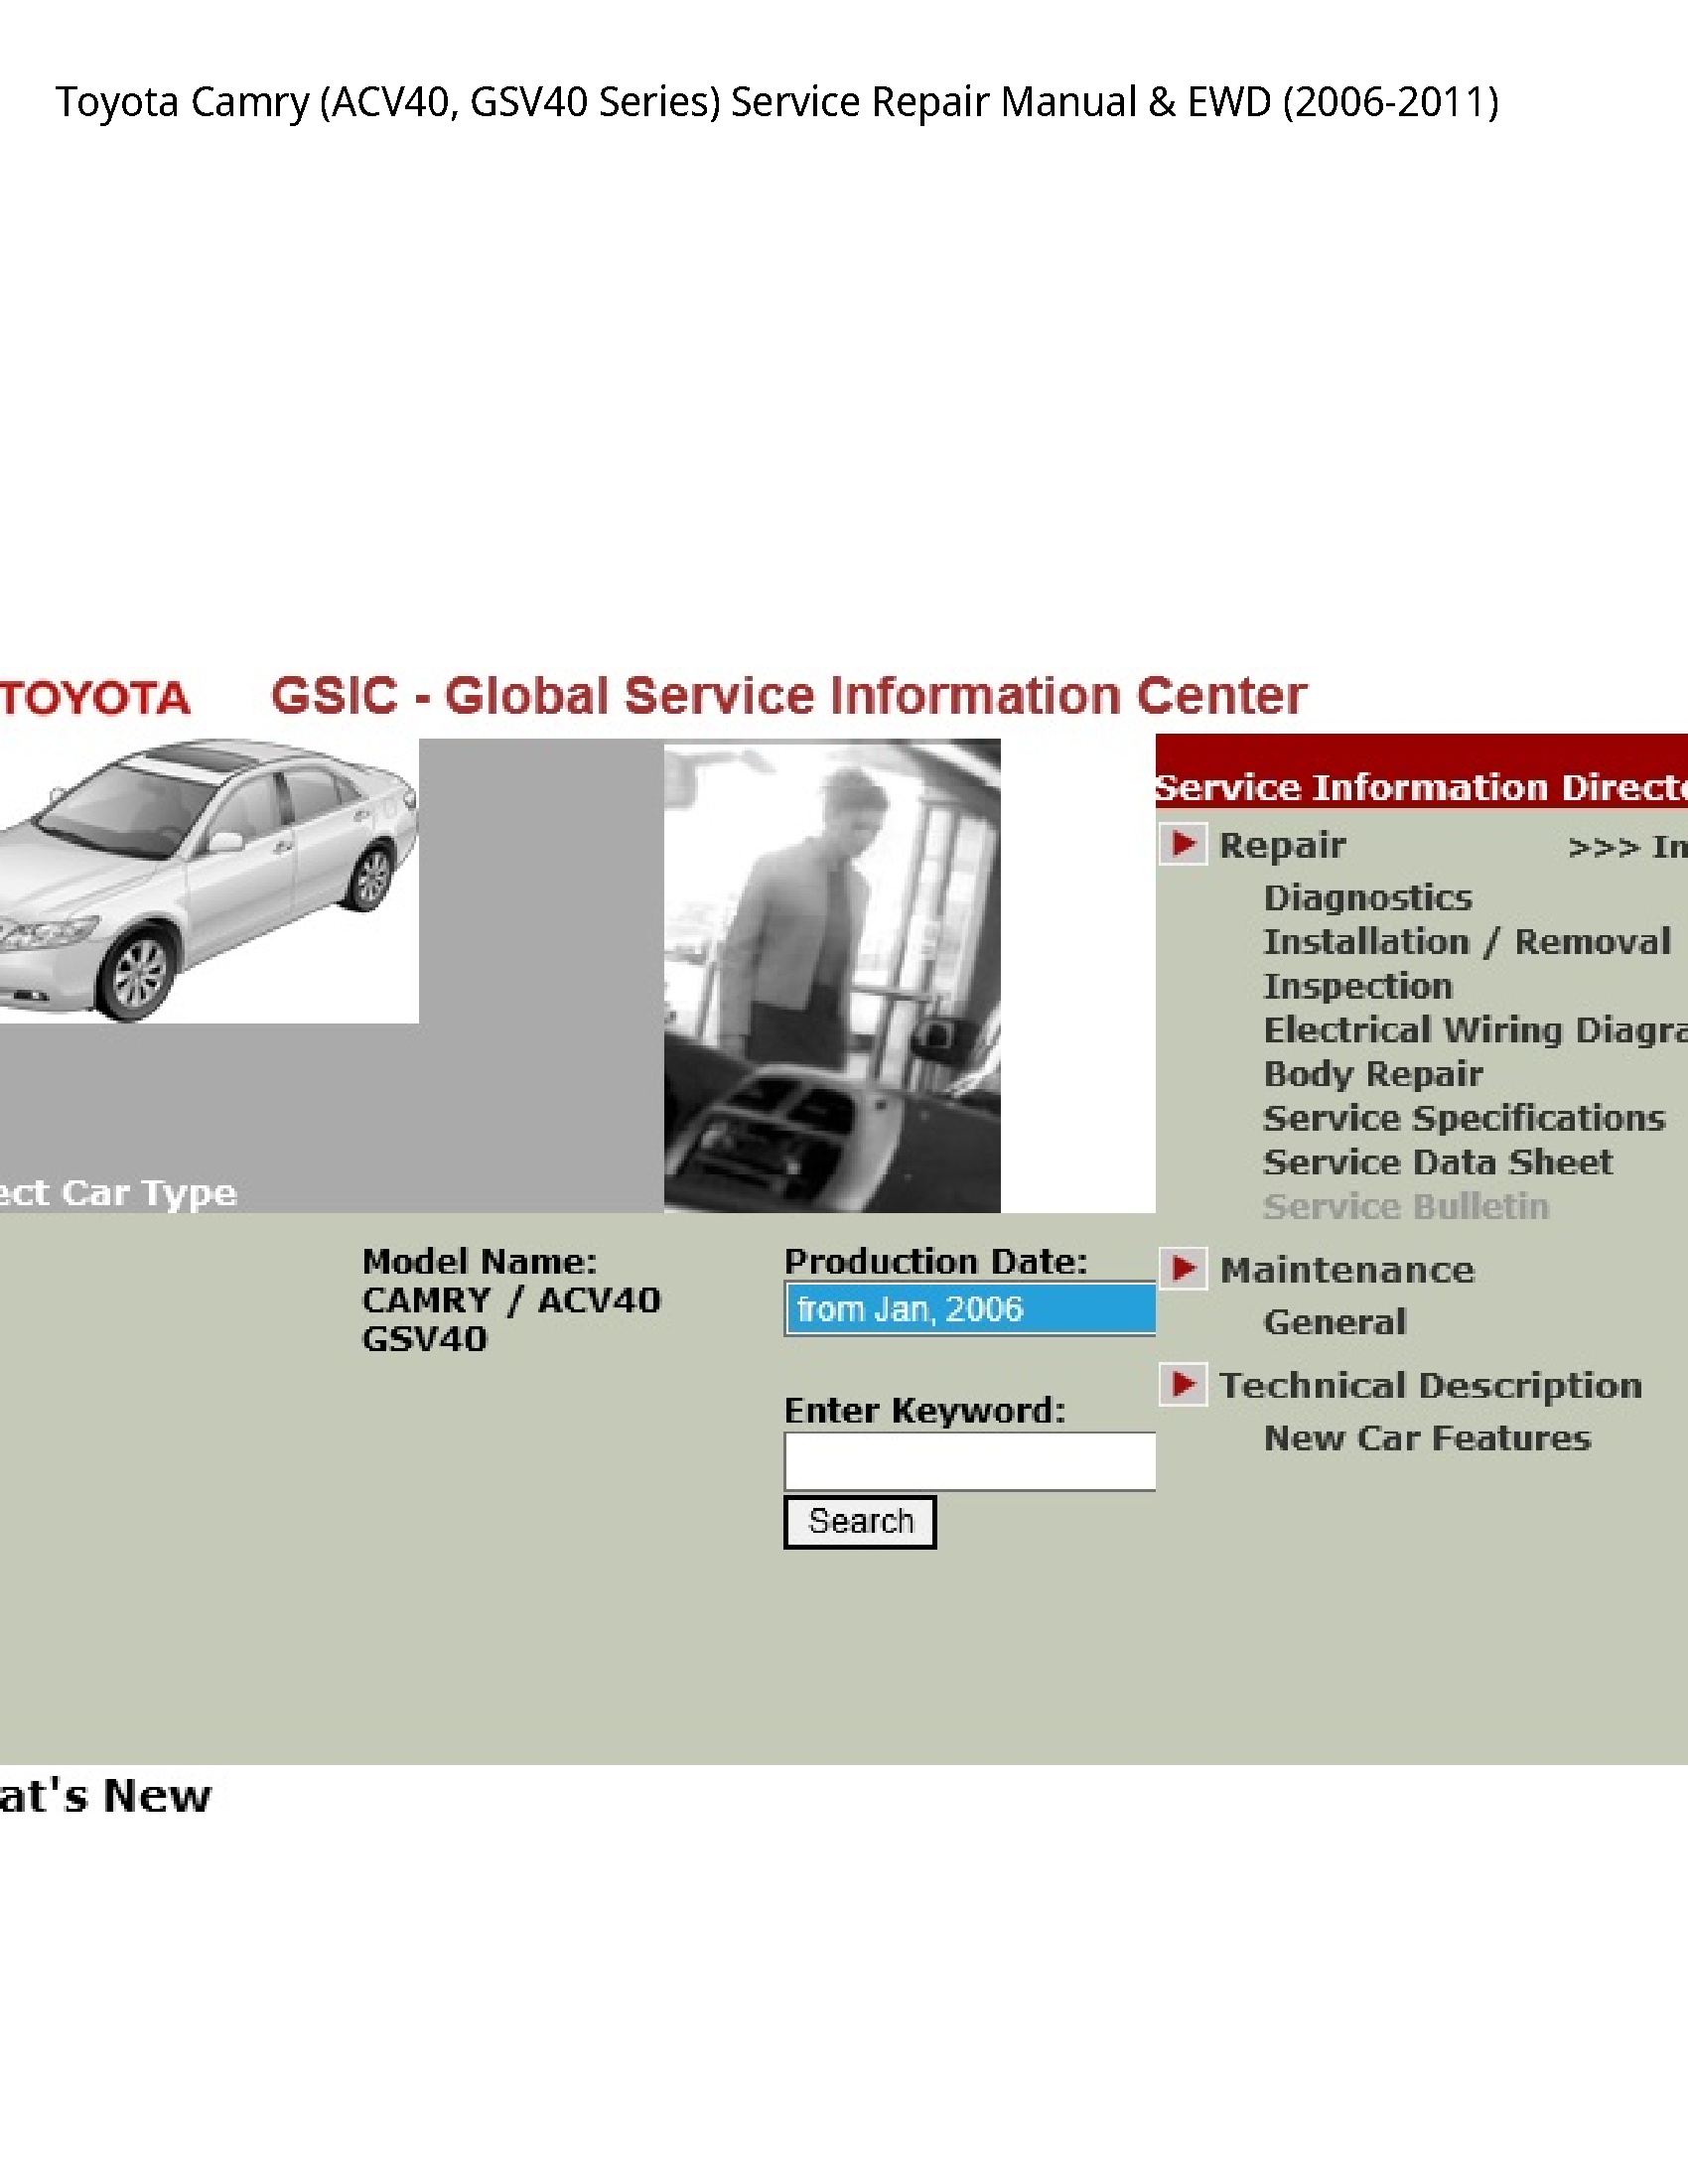 Toyota (ACV40 Camry Series) manual